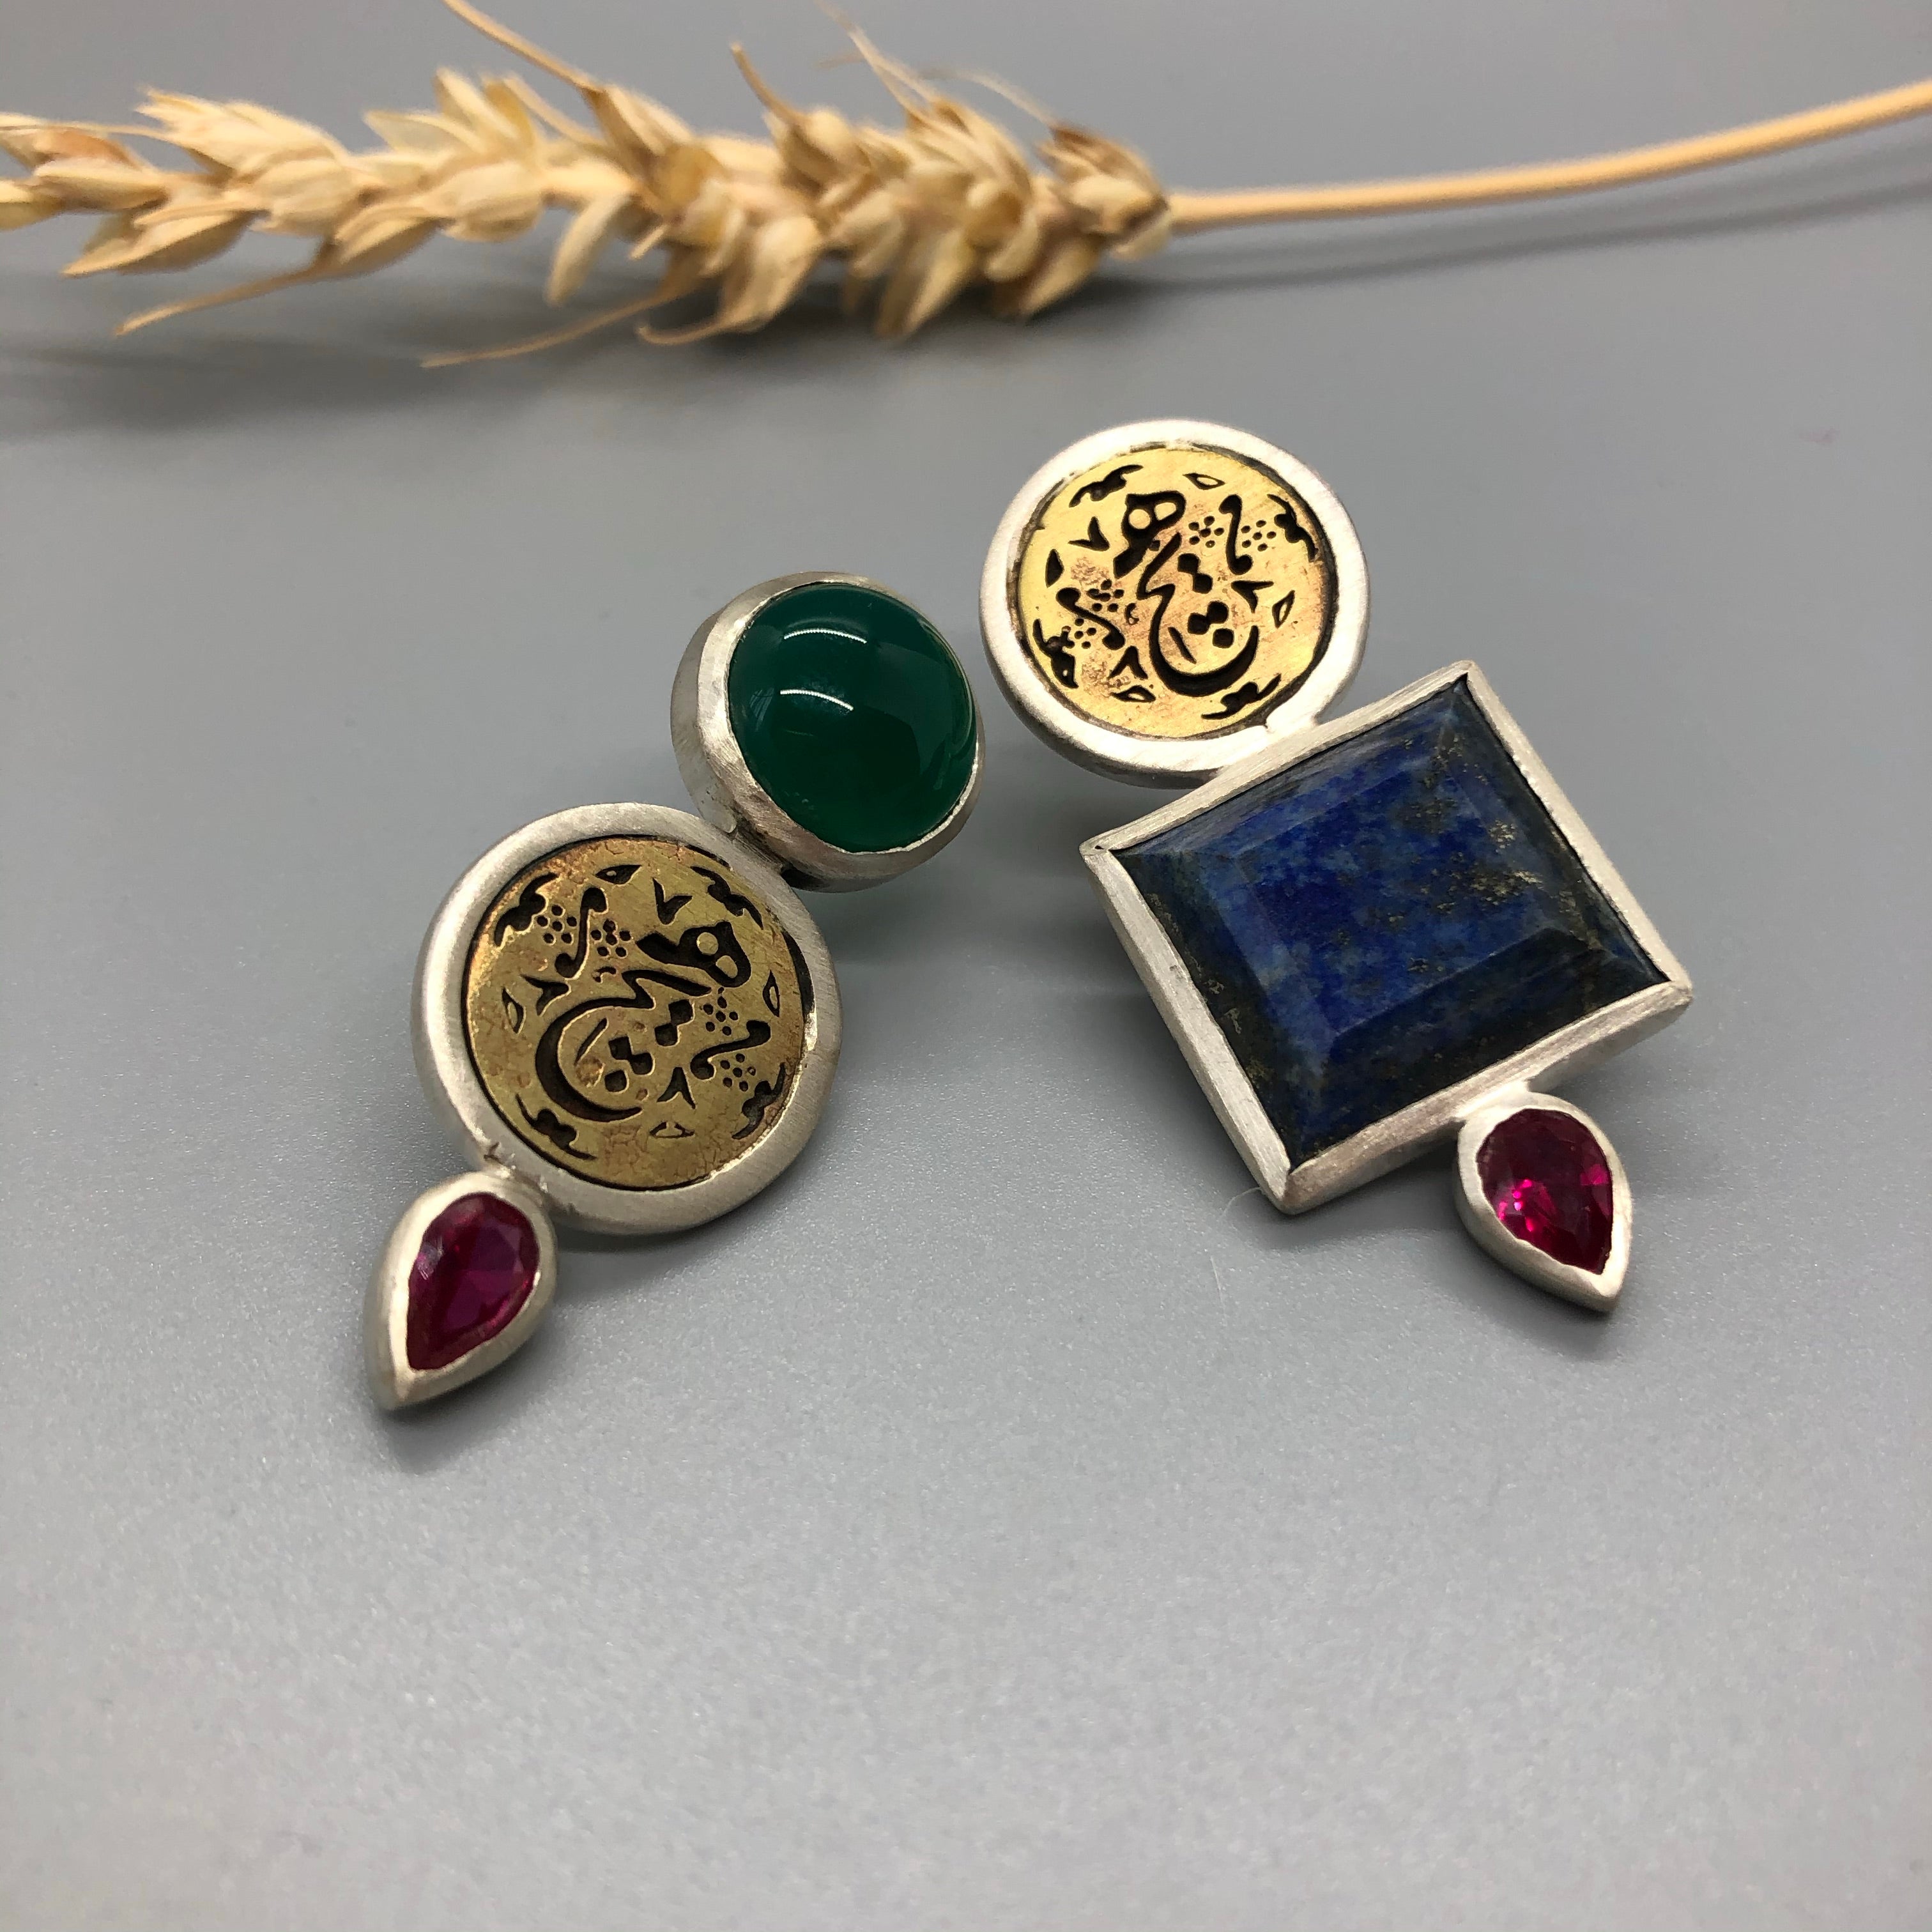 Persian Calligraphy Jewelry-Handmade Silver Earrings with Persian Calligraphy and Colorful Gemstone: Persian Jewelry-AFRA ART GALLERY